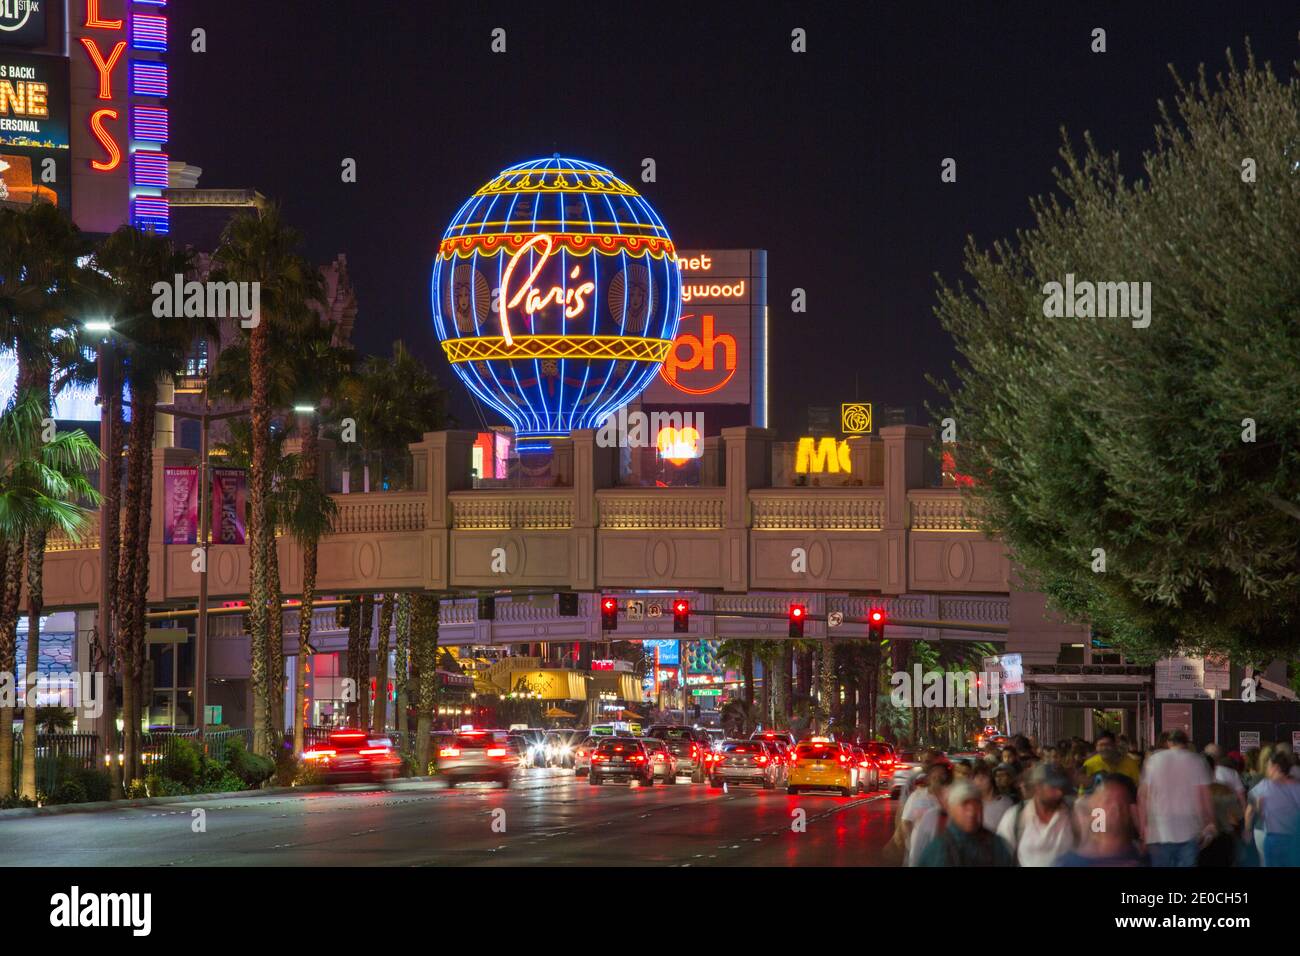 View along The Strip by night, illuminated Montgolfier balloon promoting the Paris Hotel and Casino, Las Vegas, Nevada, United States of America Stock Photo